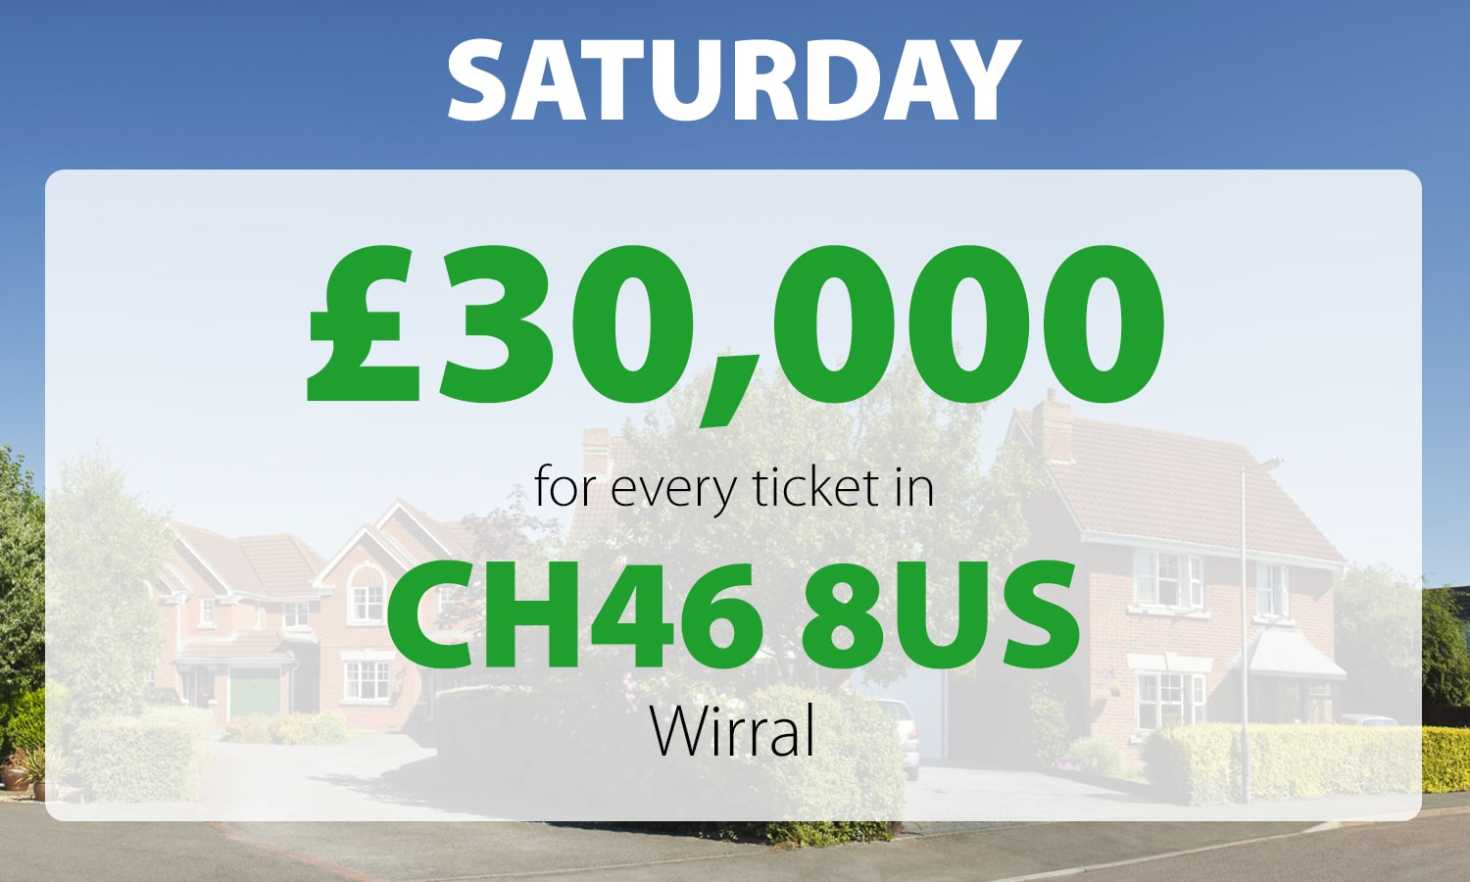 A Wirral winner has scooped £30,000 thanks to their postcode